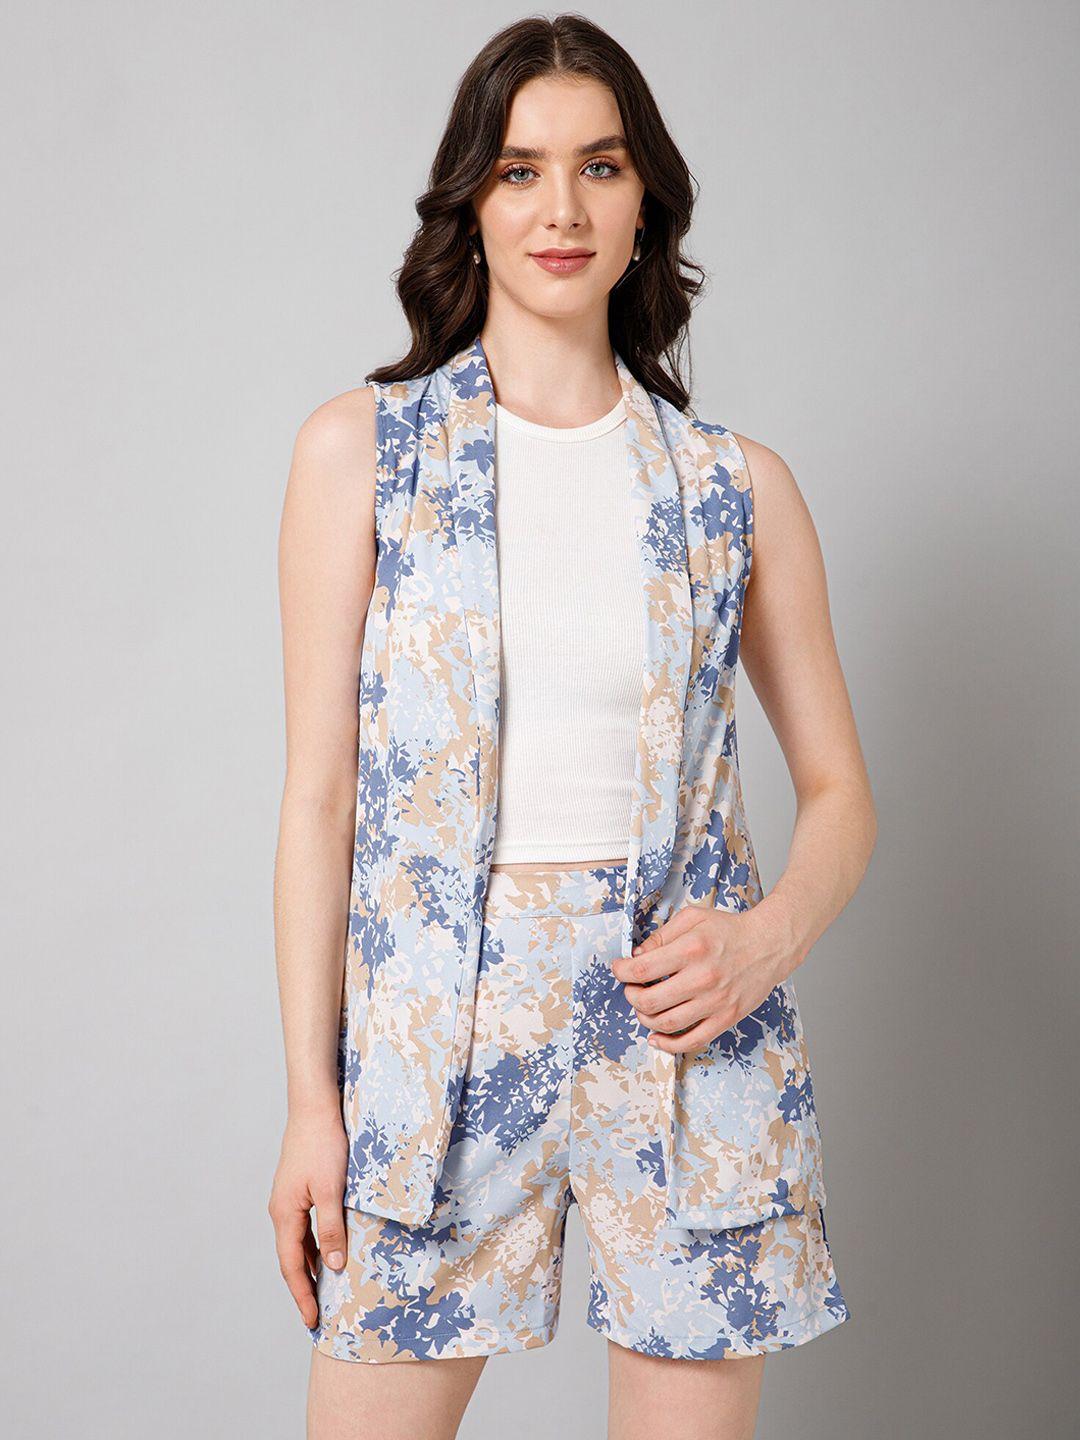 purys printed coat with shorts co-ords